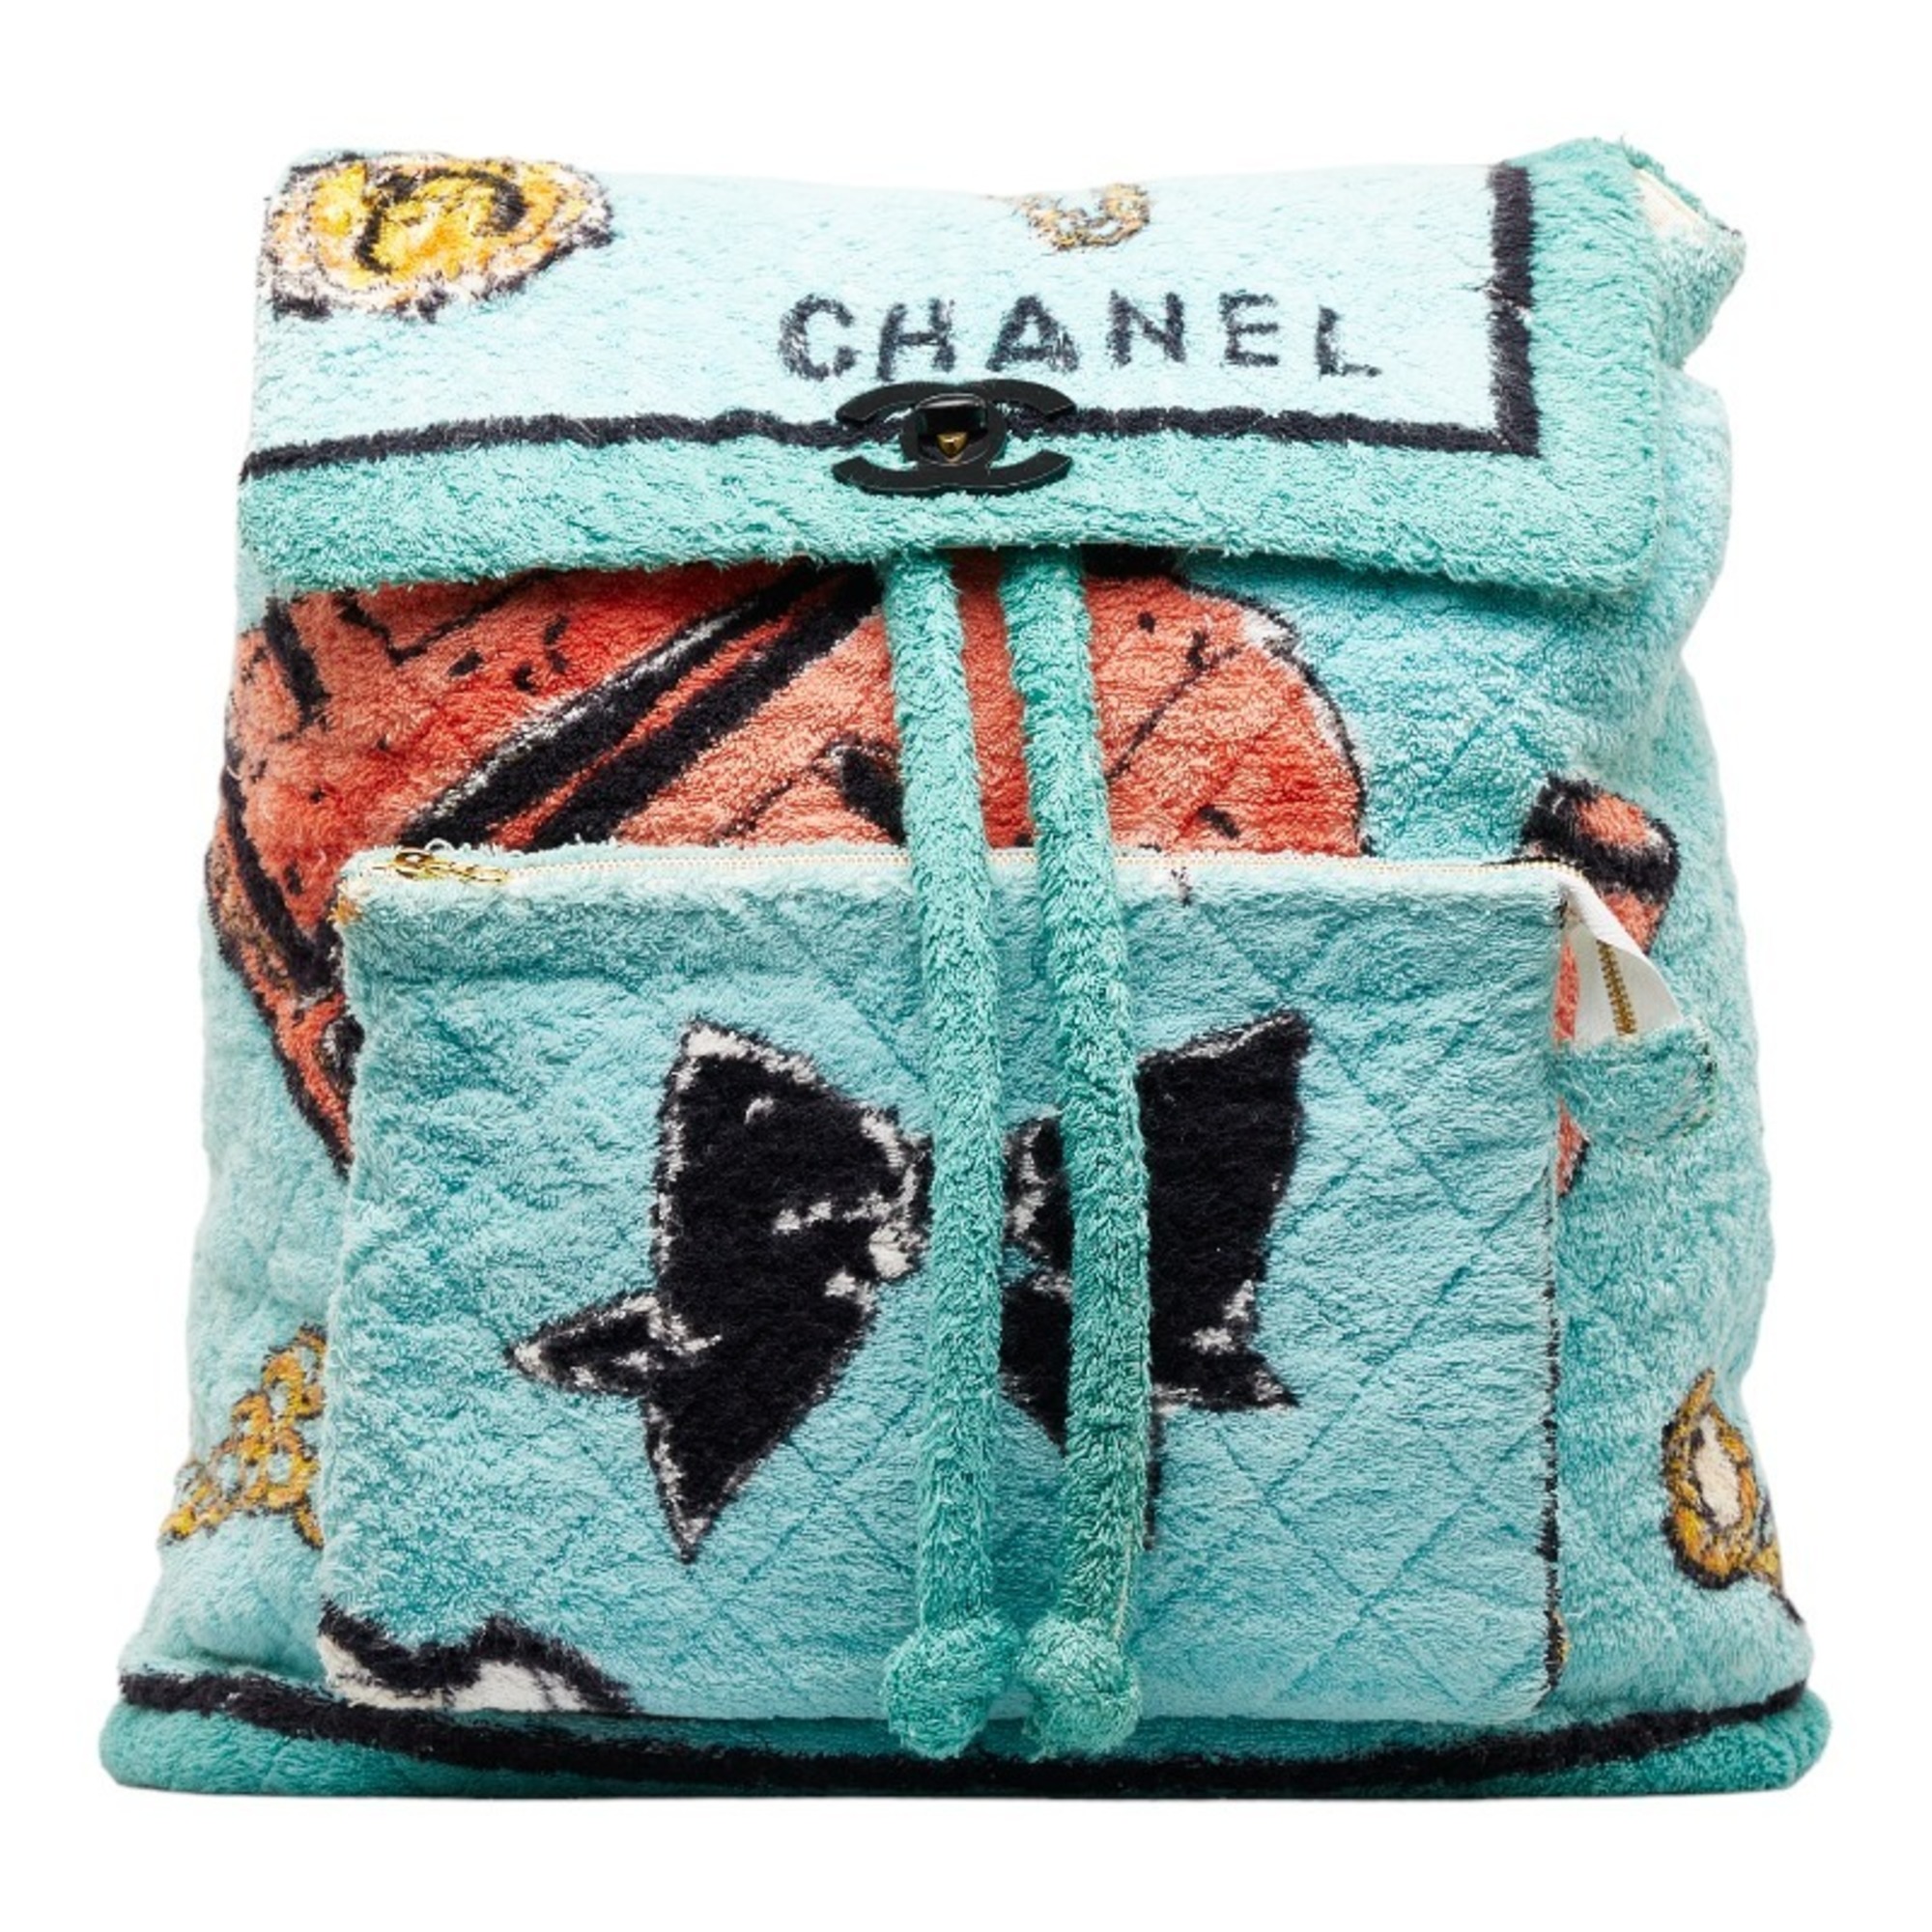 Chanel pile rucksack backpack green multicolor cotton ladies CHANEL